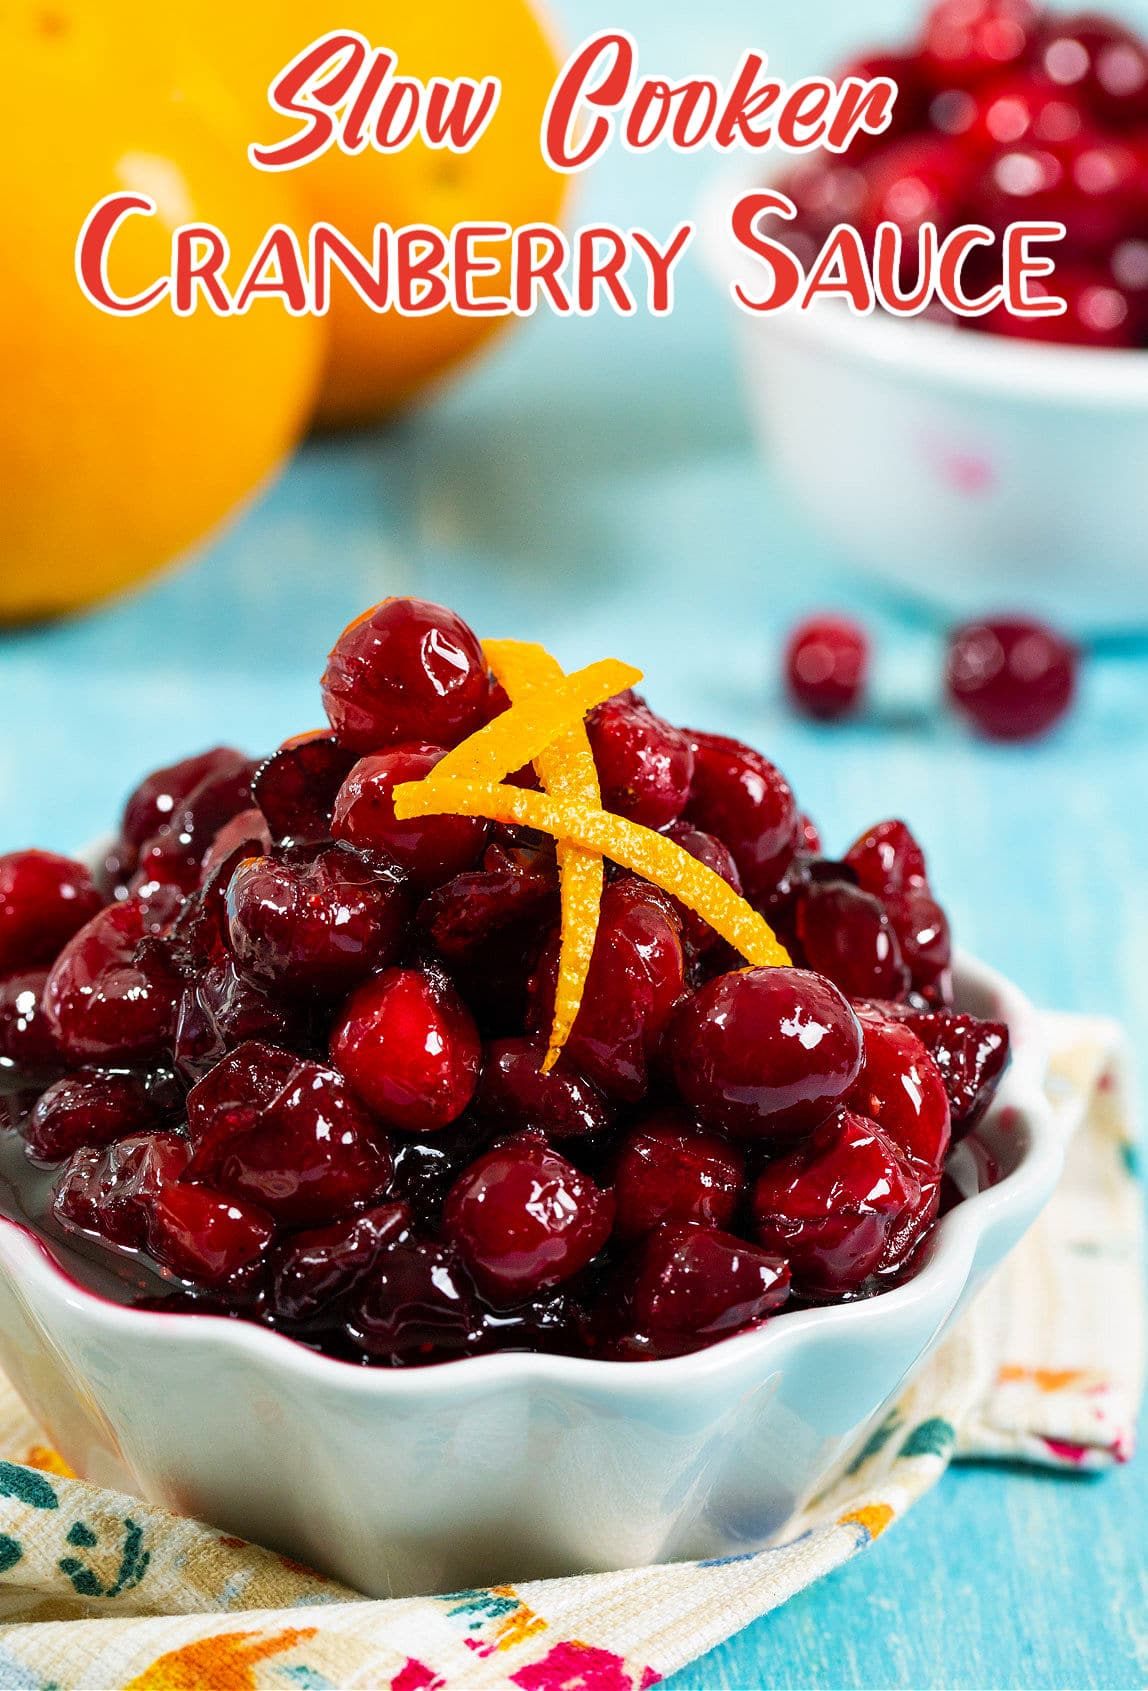 Slow Cooker Cranberry Sauce in a white bowl.